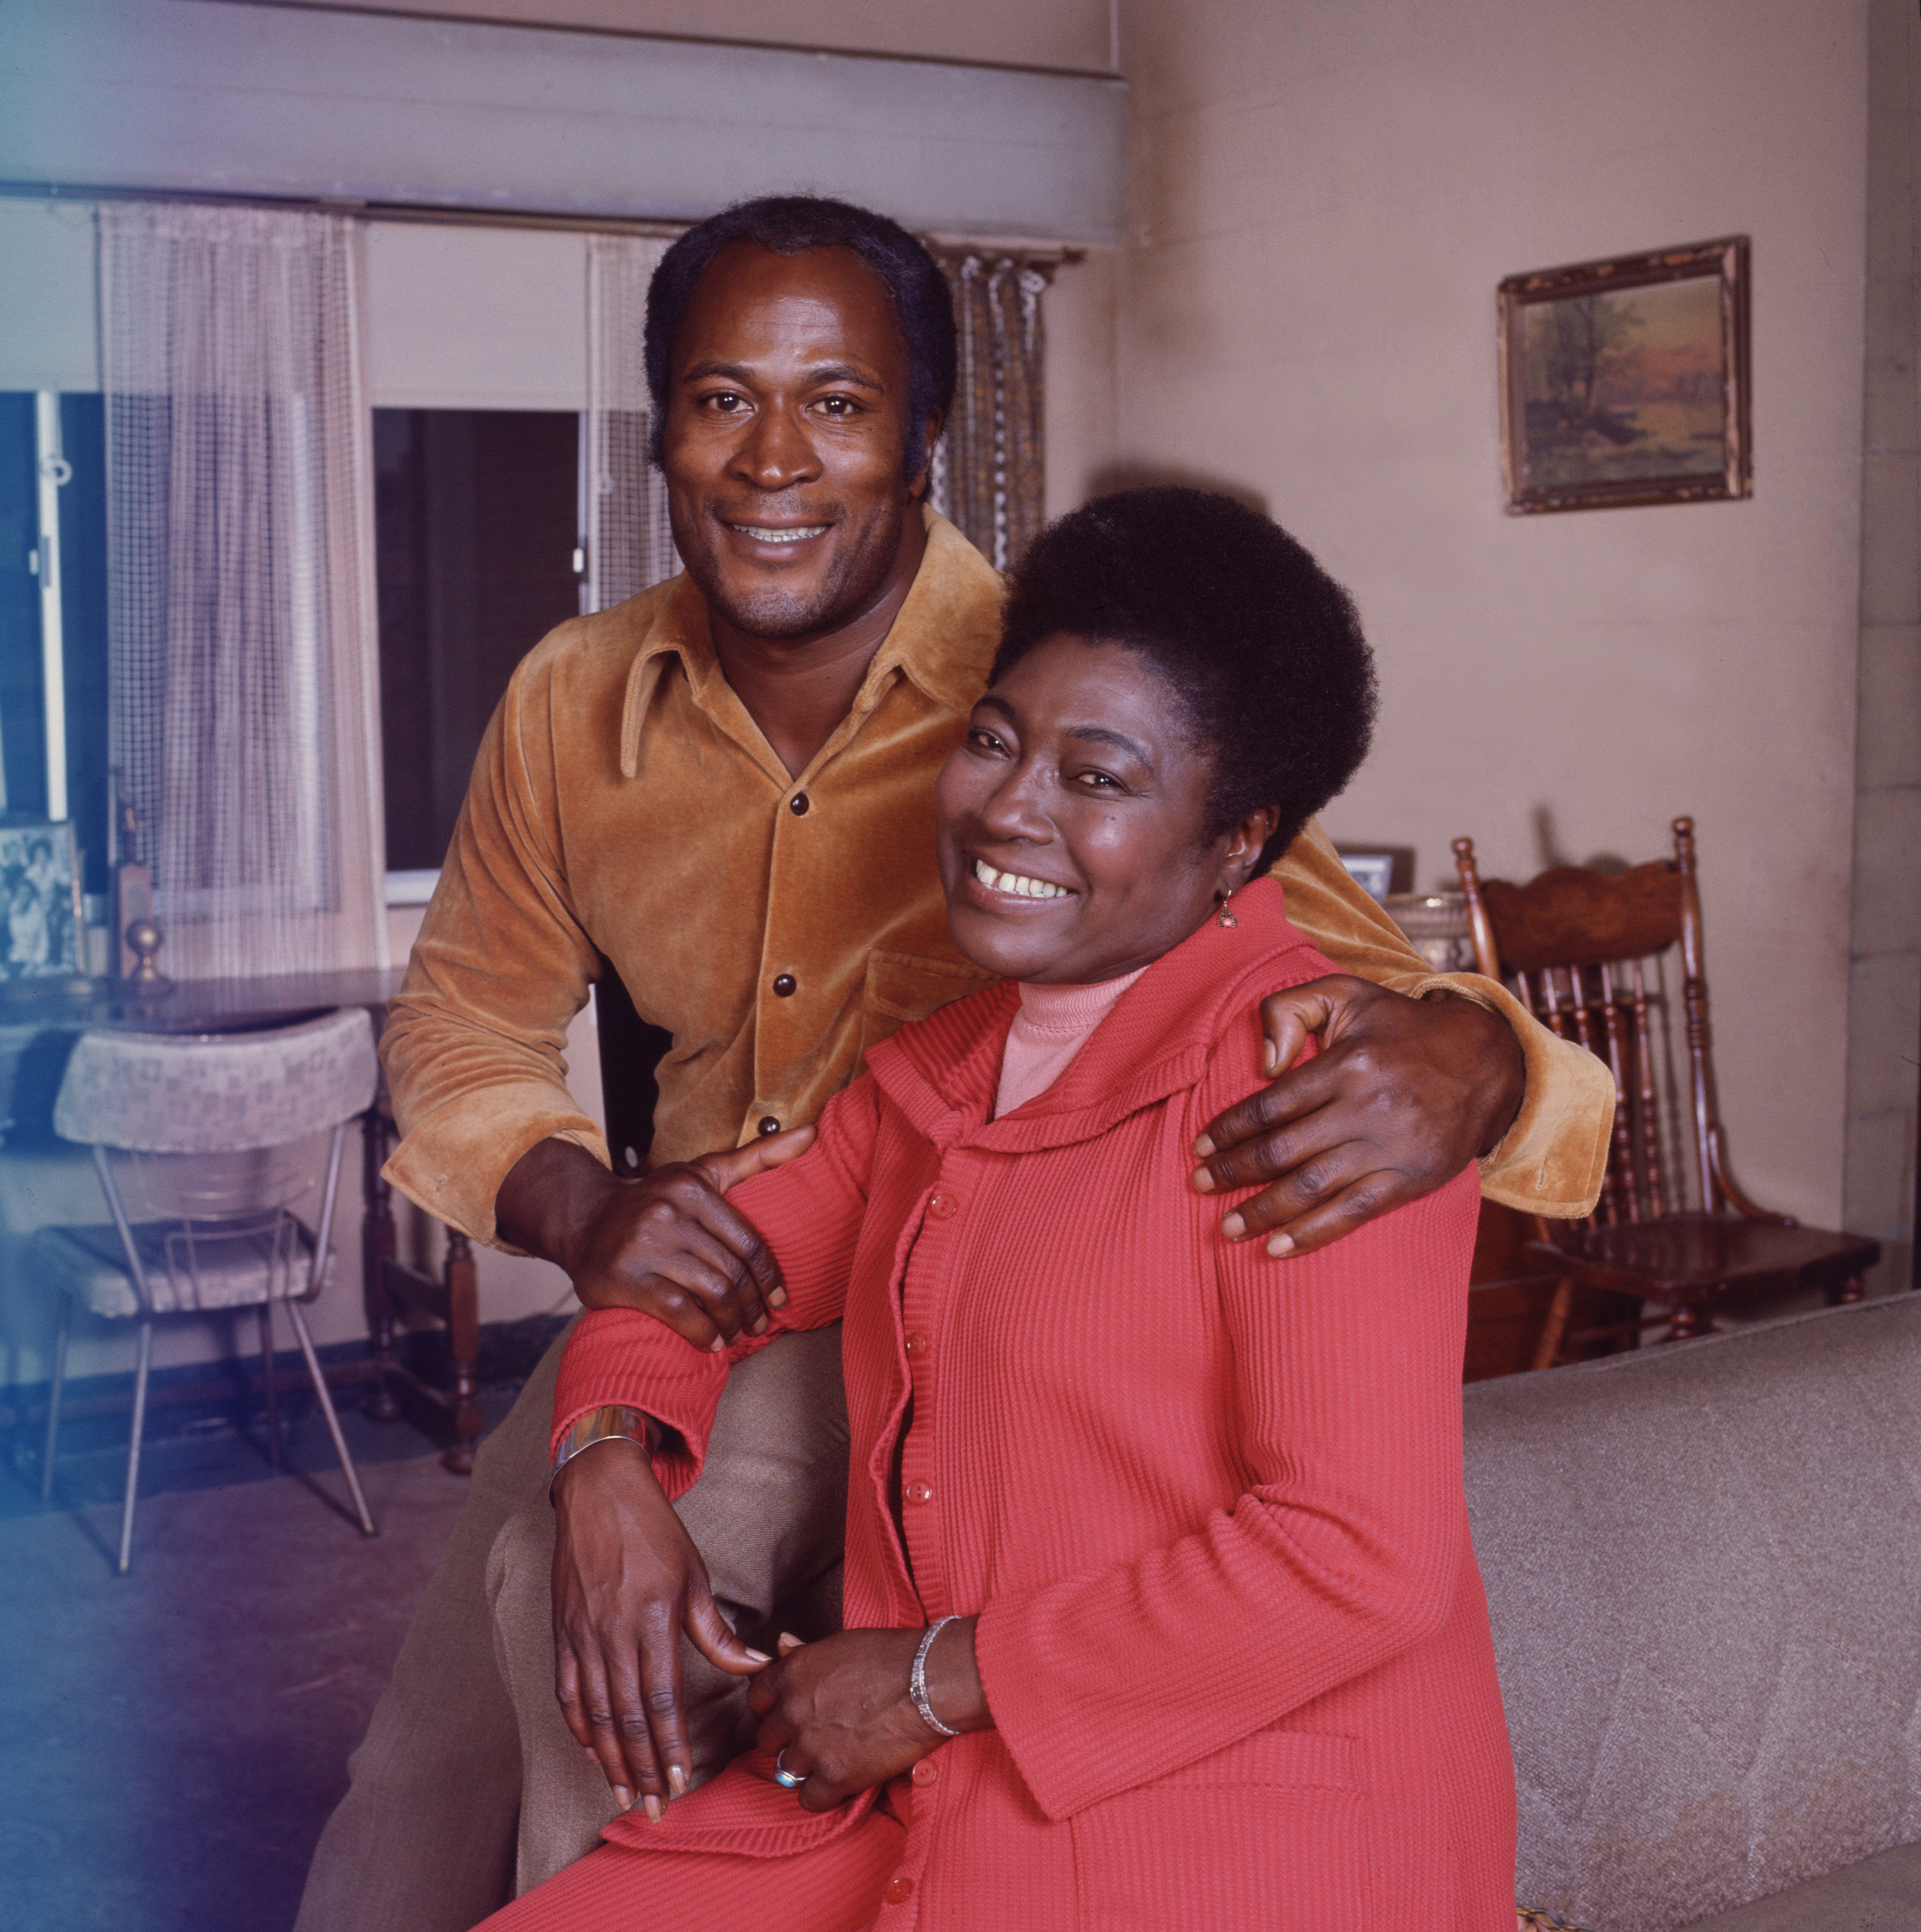 John Amos and Esther Rolle in a promotional portrait for "Good Times," in Los Angeles, California, 1975 | Source: Getty Images